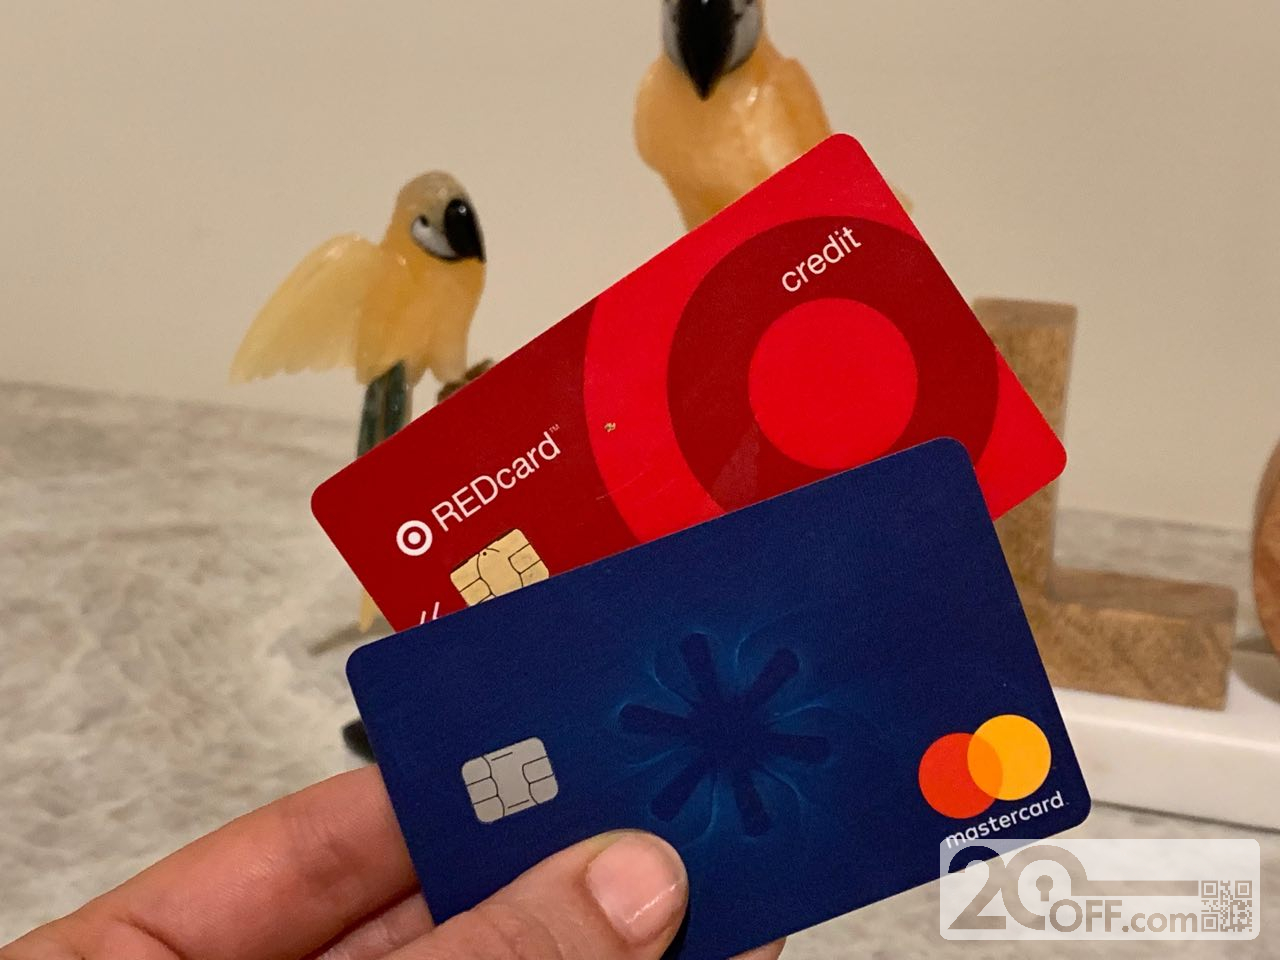 Walmart And Target Credit Cards